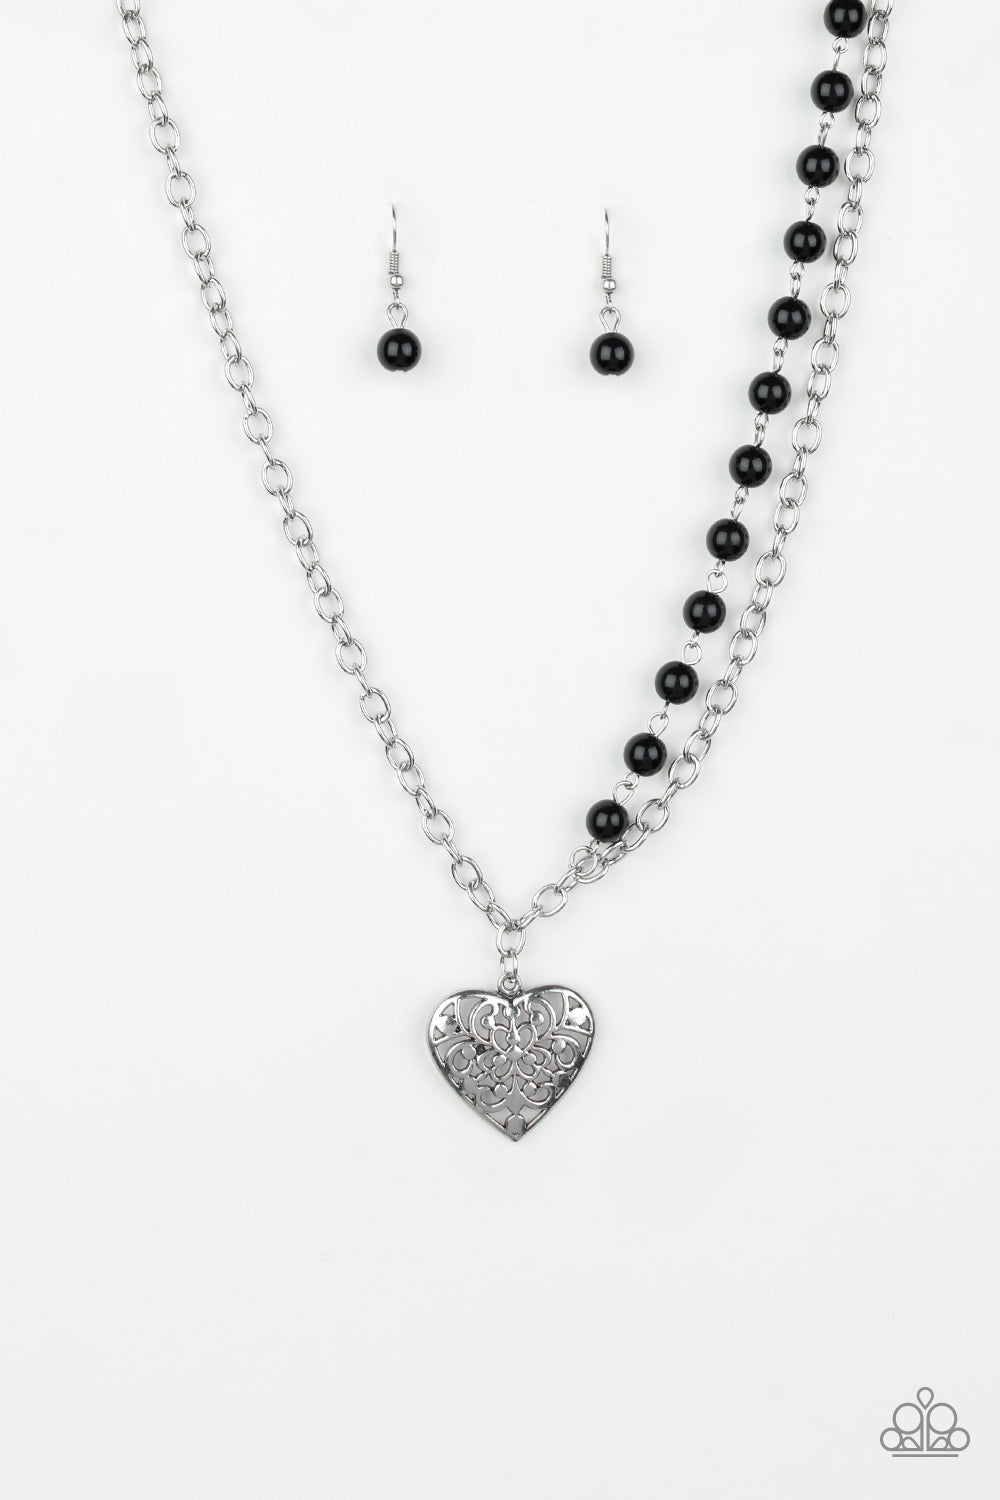 Forever In My Heart Black Paparazzi Necklaces Cashmere Pink Jewels - Cashmere Pink Jewels & Accessories, Cashmere Pink Jewels & Accessories - Paparazzi